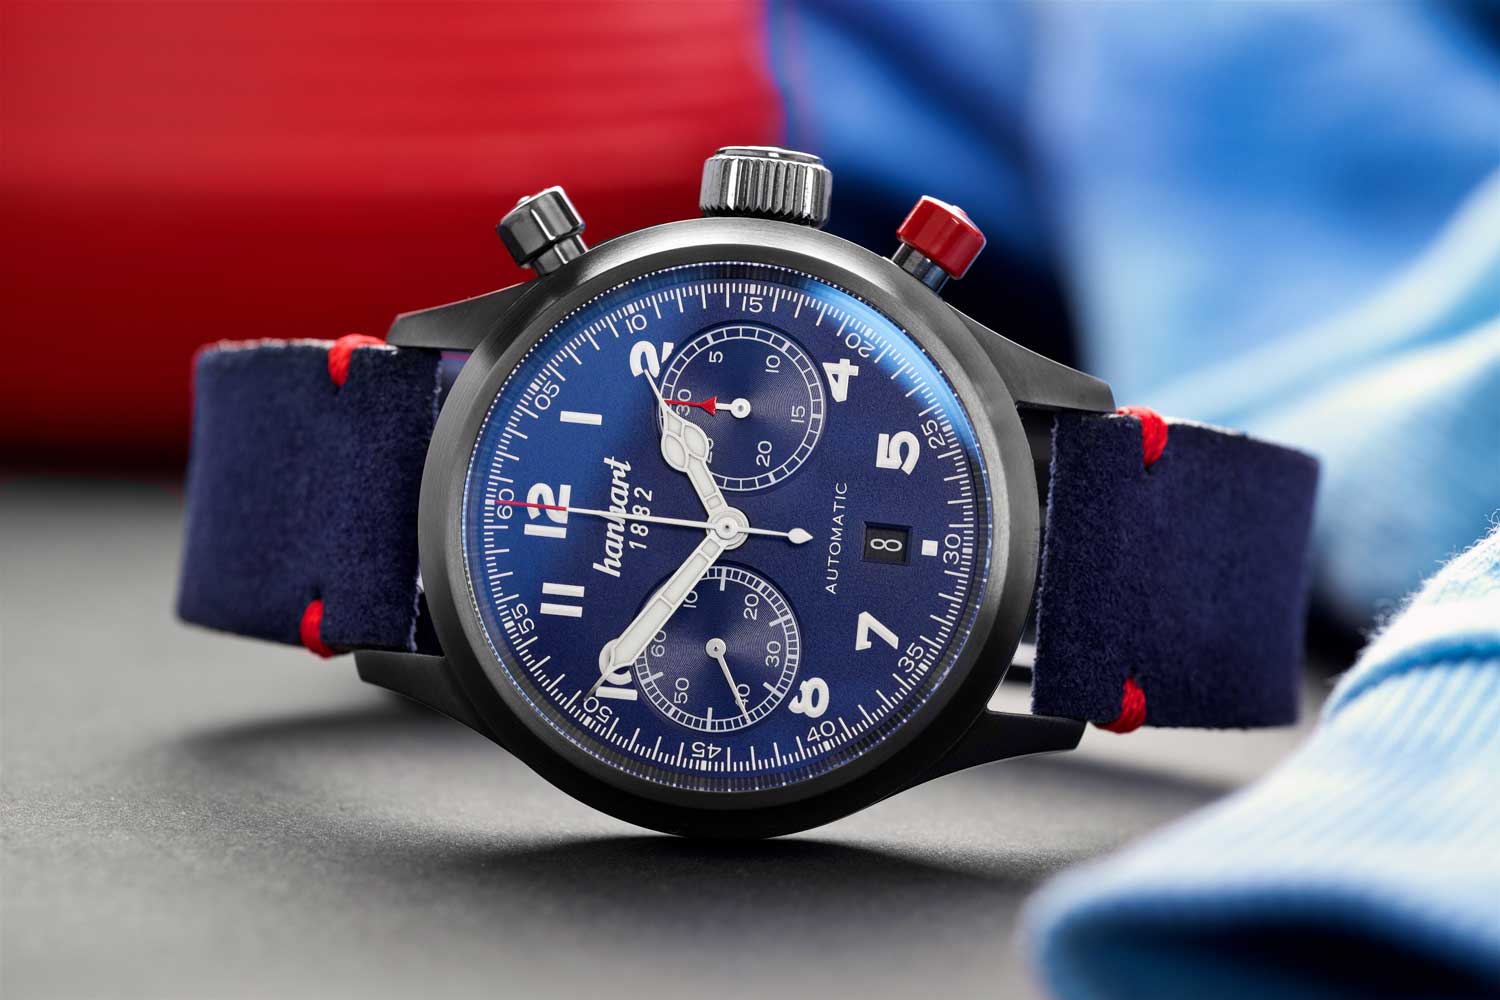 This 42mm limited edition watch features a royal blue bi-compax dial which comes on a blue ox leather strap complete with a suede finish and red accents.